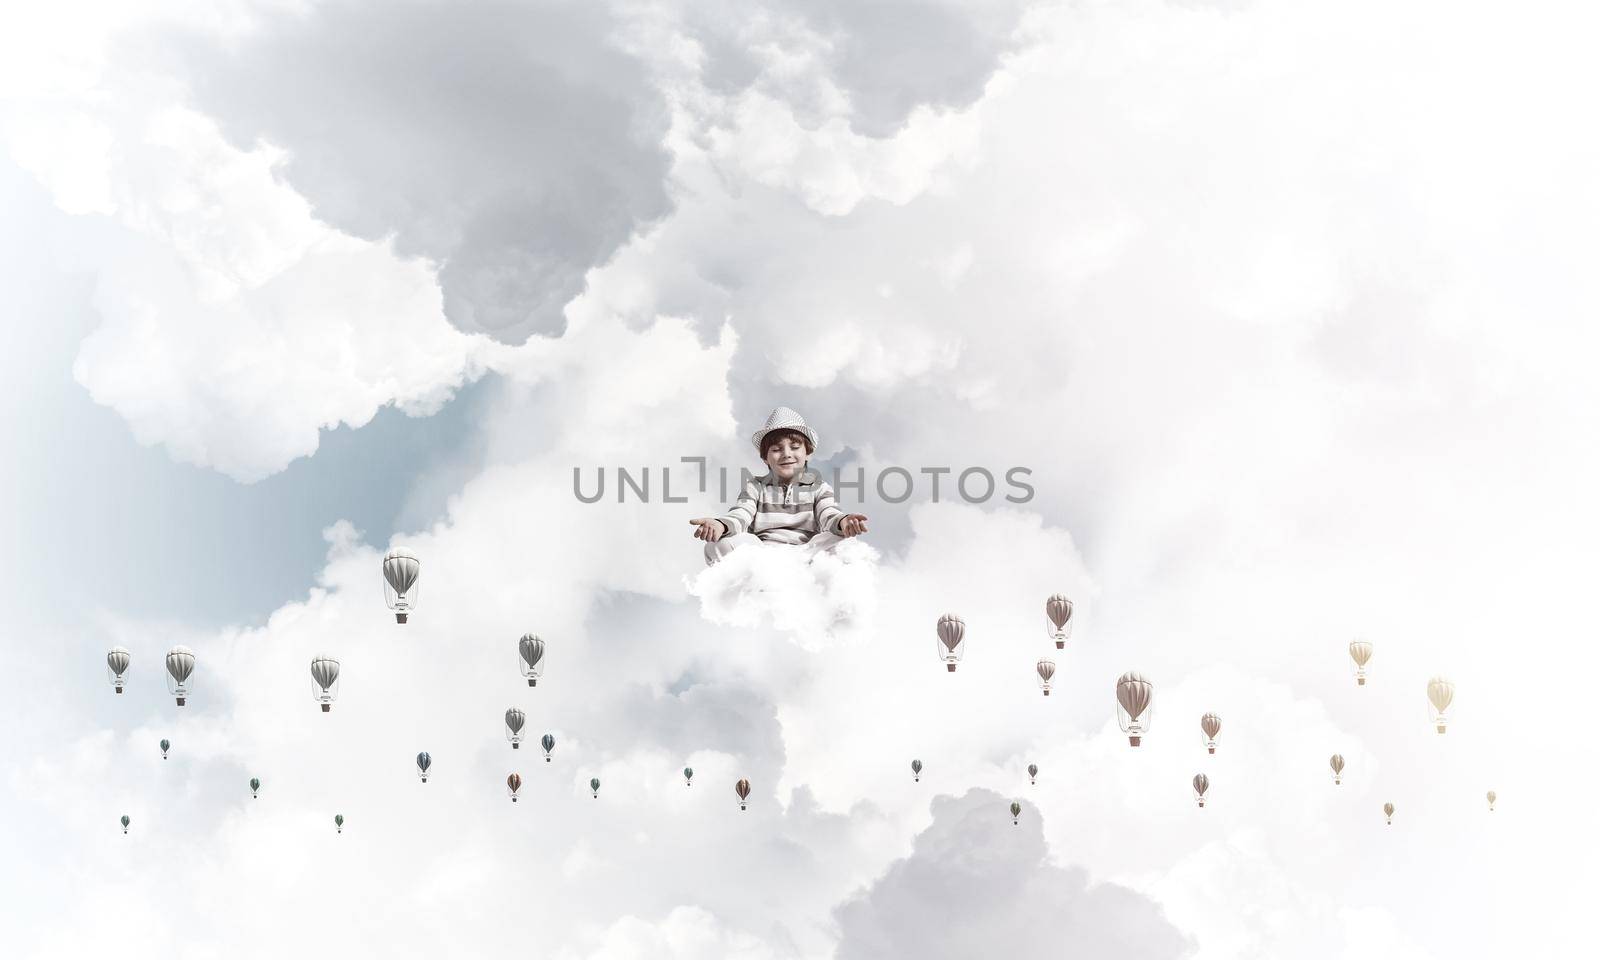 Young little boy keeping eyes closed and looking concentrated while meditating among flying balloons in the air with cloudy skyscape on background.